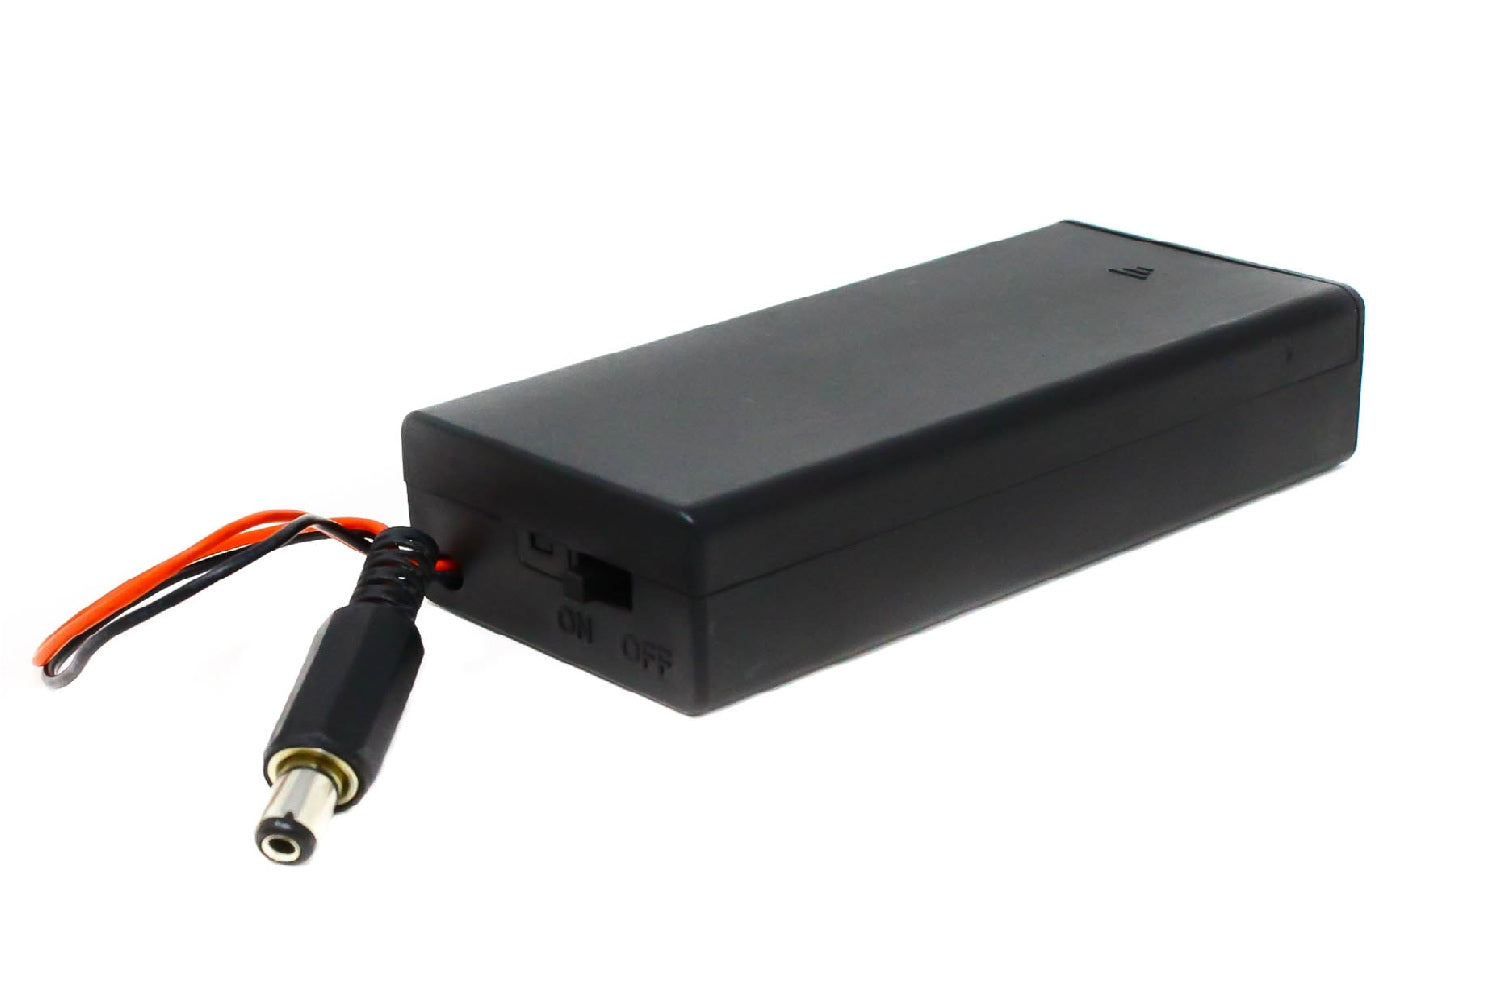 18650 x 2 battery holder with cover and On/Off Switch With DC jack